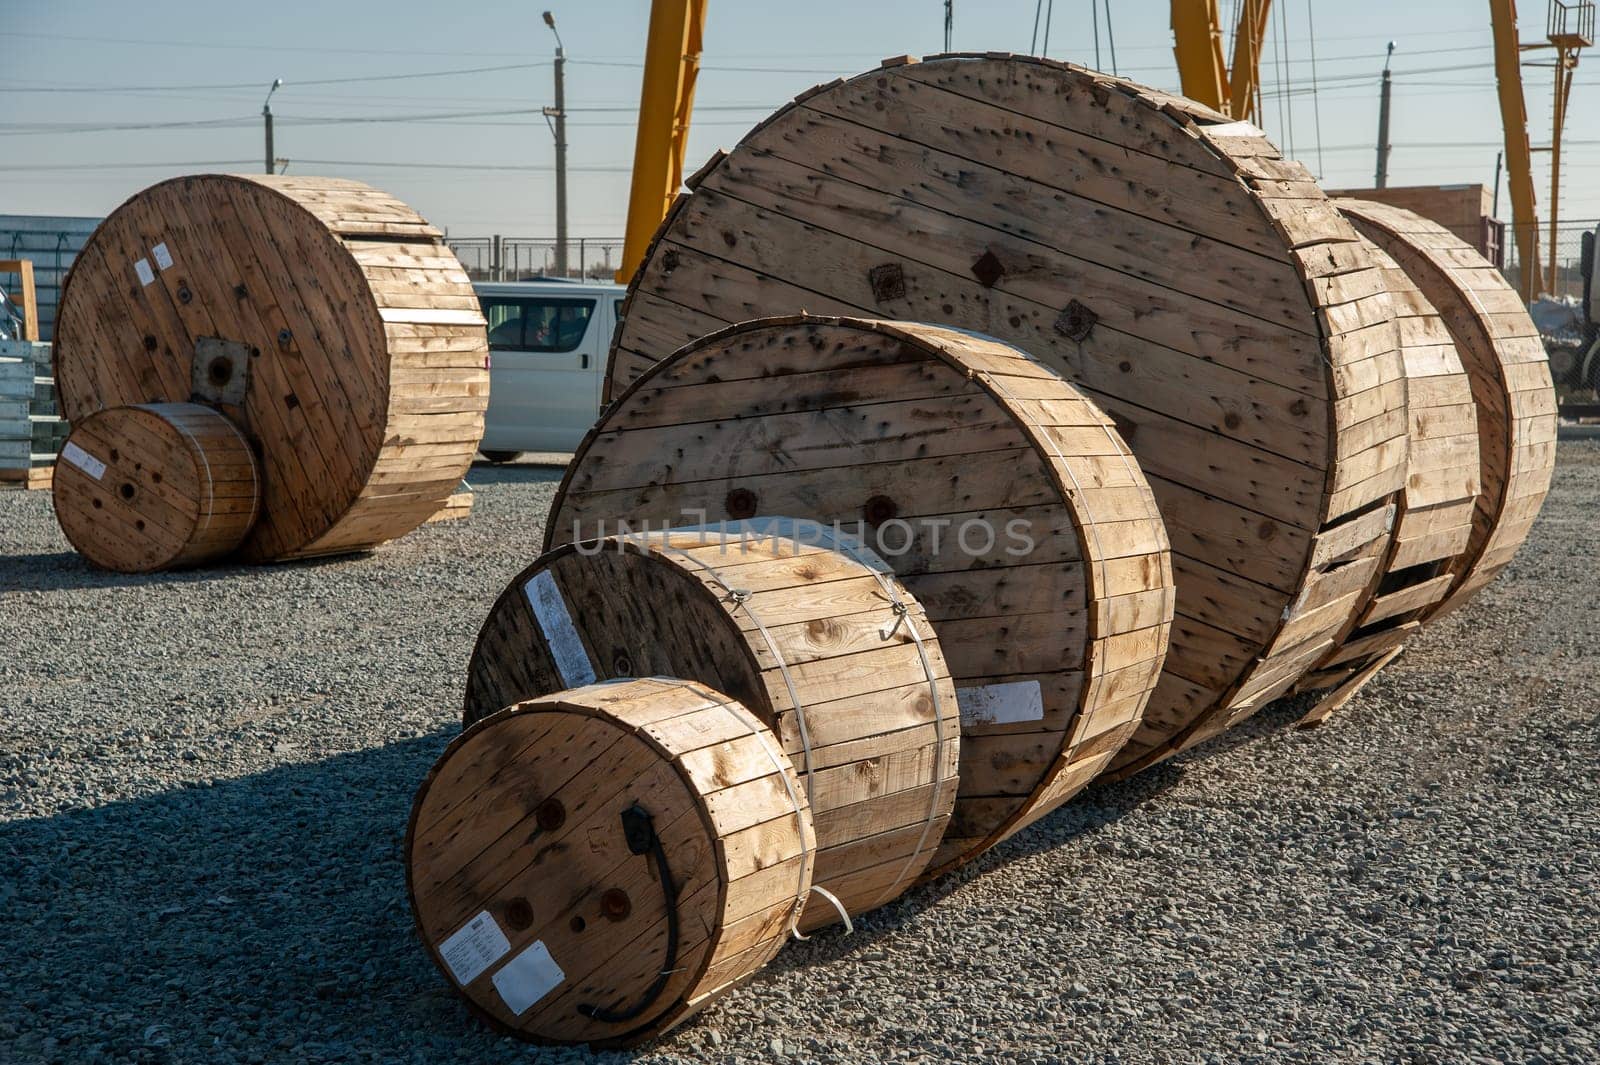 A closeup of large industrial wooden bobbins with cable on a construction site